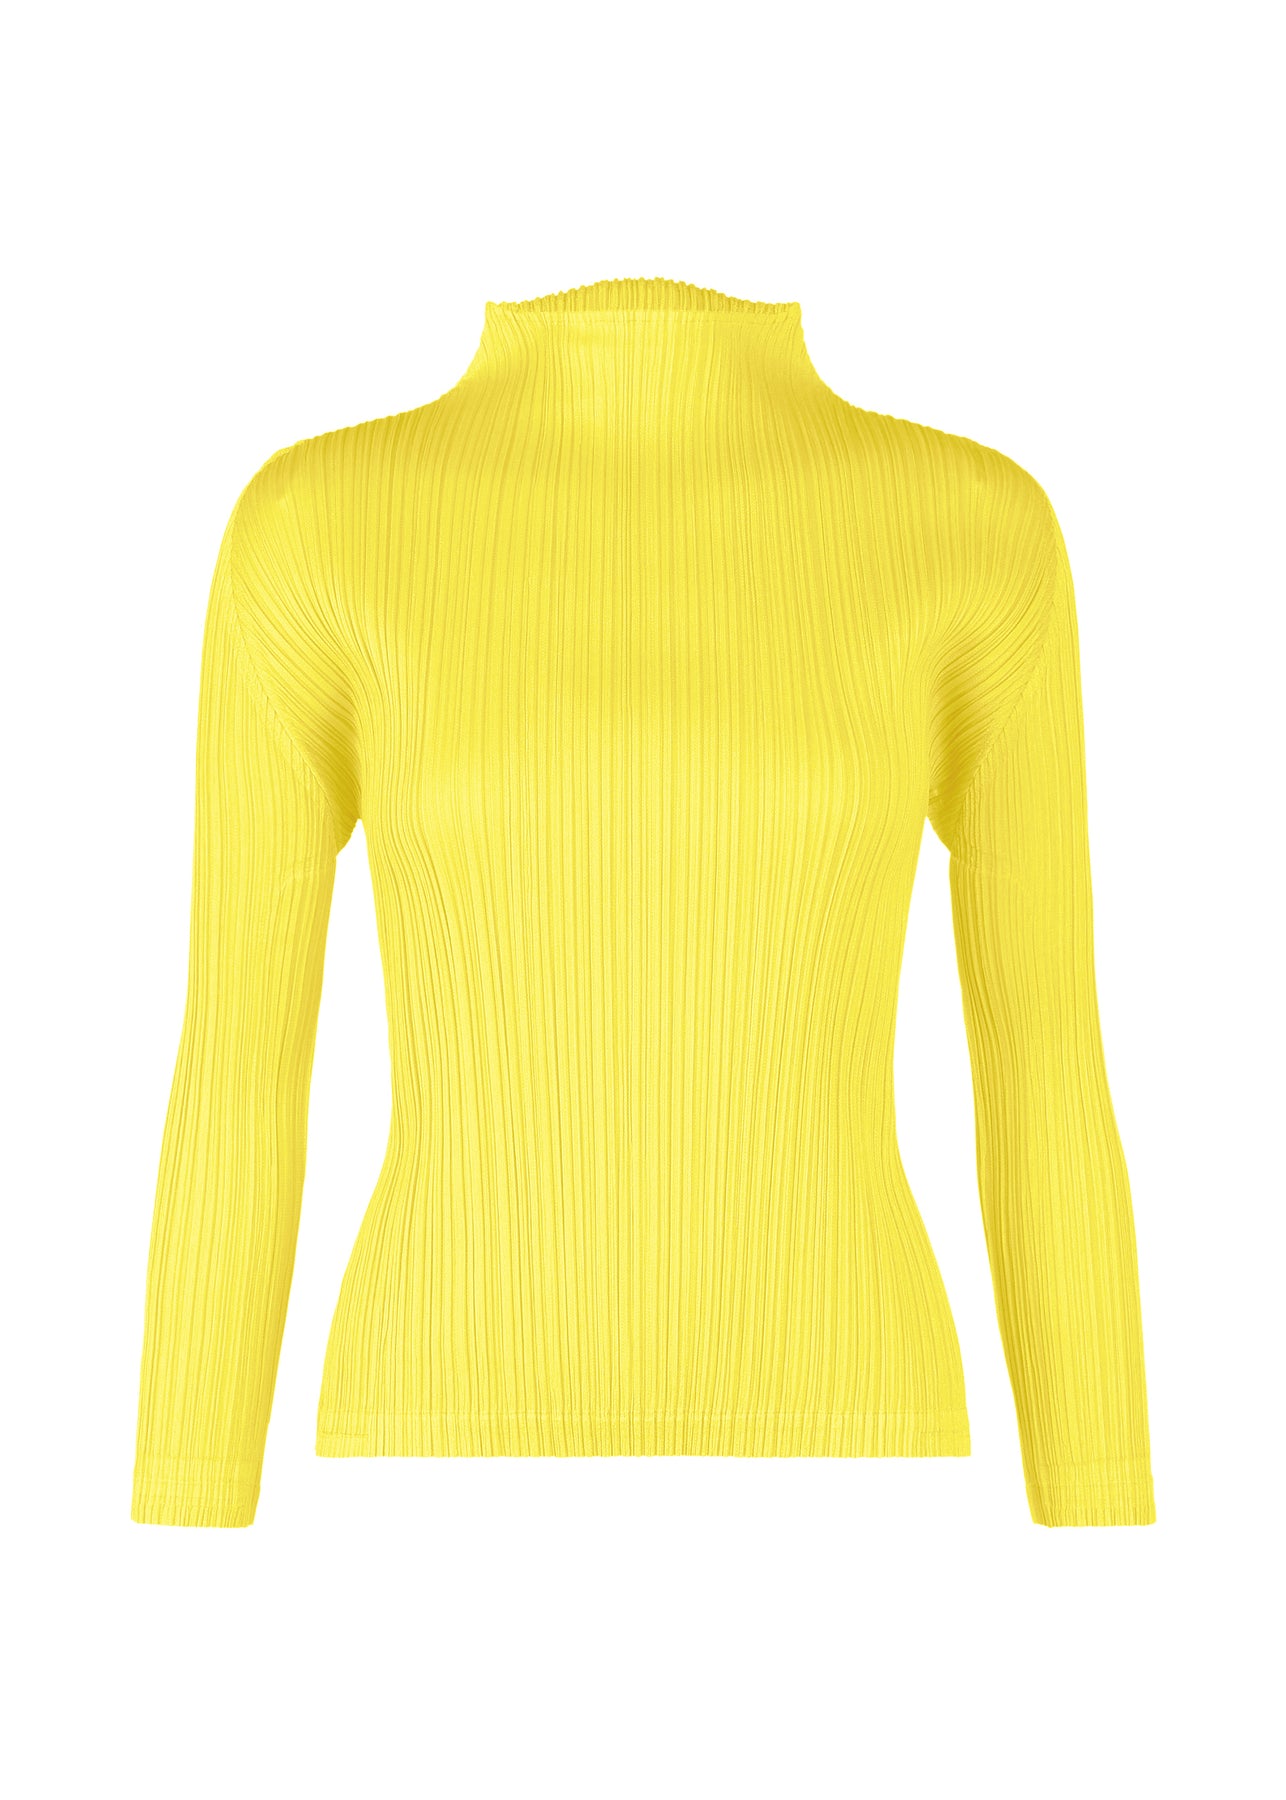 MONTHLY COLORS : NOVEMBER TOP | The official ISSEY MIYAKE ONLINE